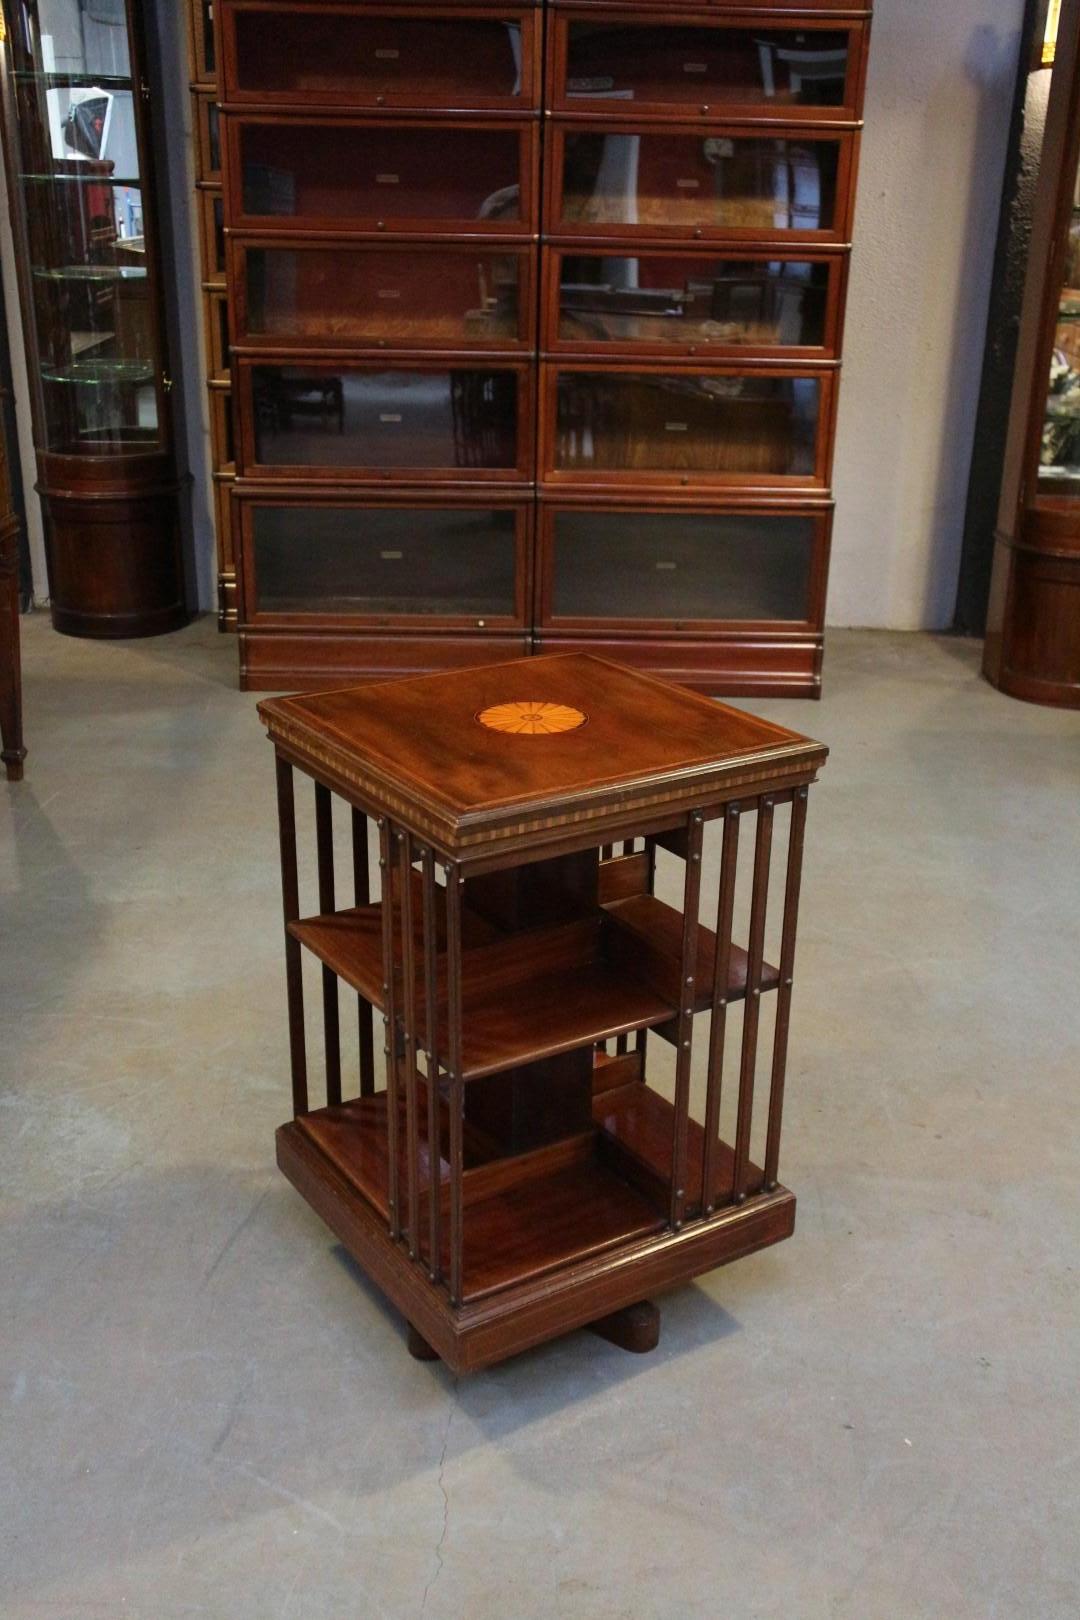 Beautiful antique mahogany book mill with particularly beautiful marquetry. Inlaid with satin wood. Super quality book mill from the famous English 19th century furniture maker Maple & Co. with the characteristic cast iron base. Nice color and